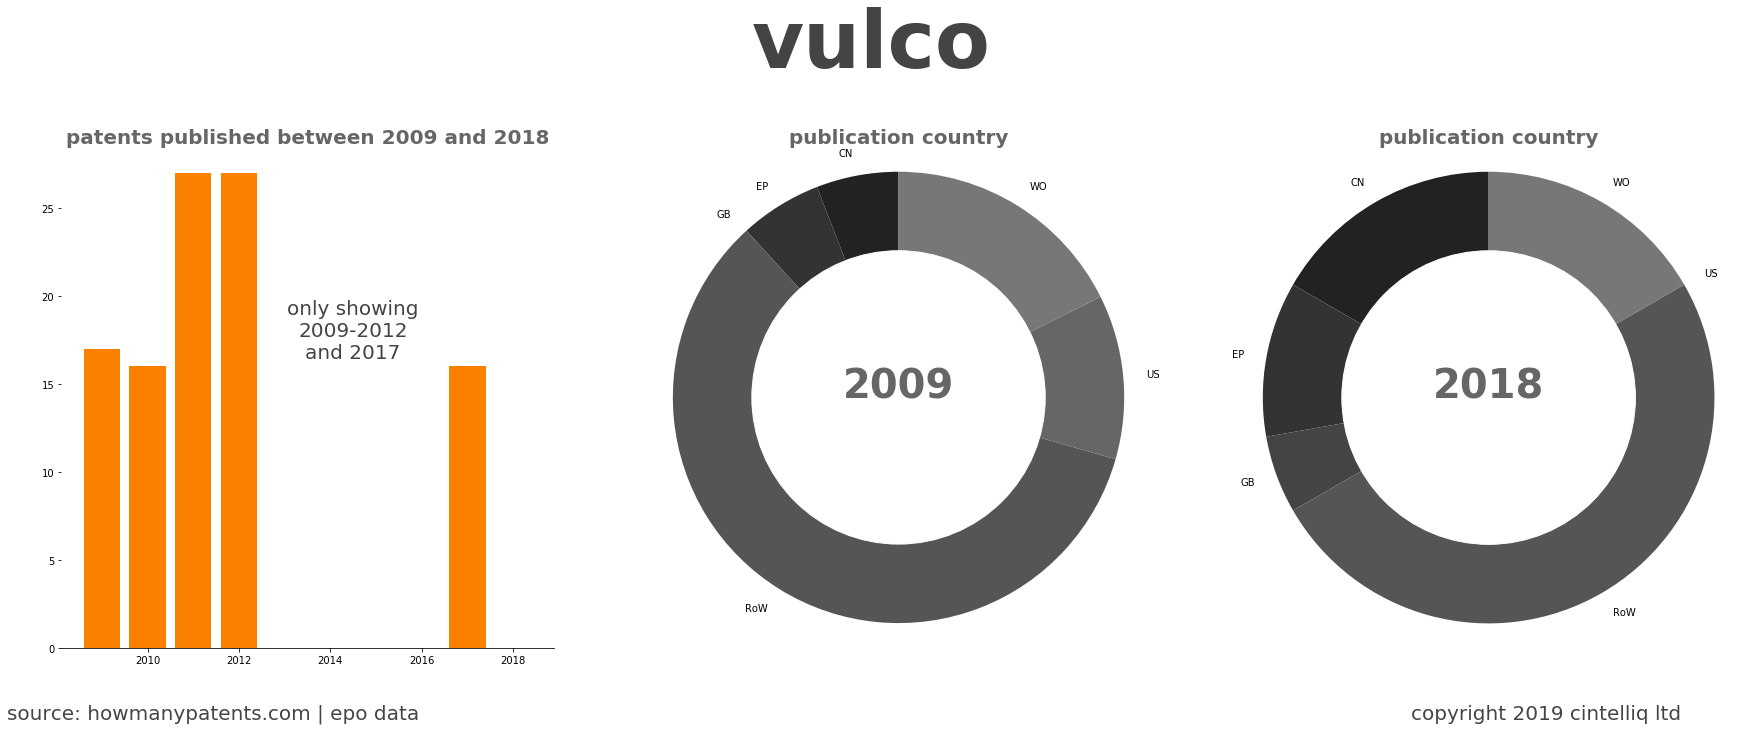 summary of patents for Vulco